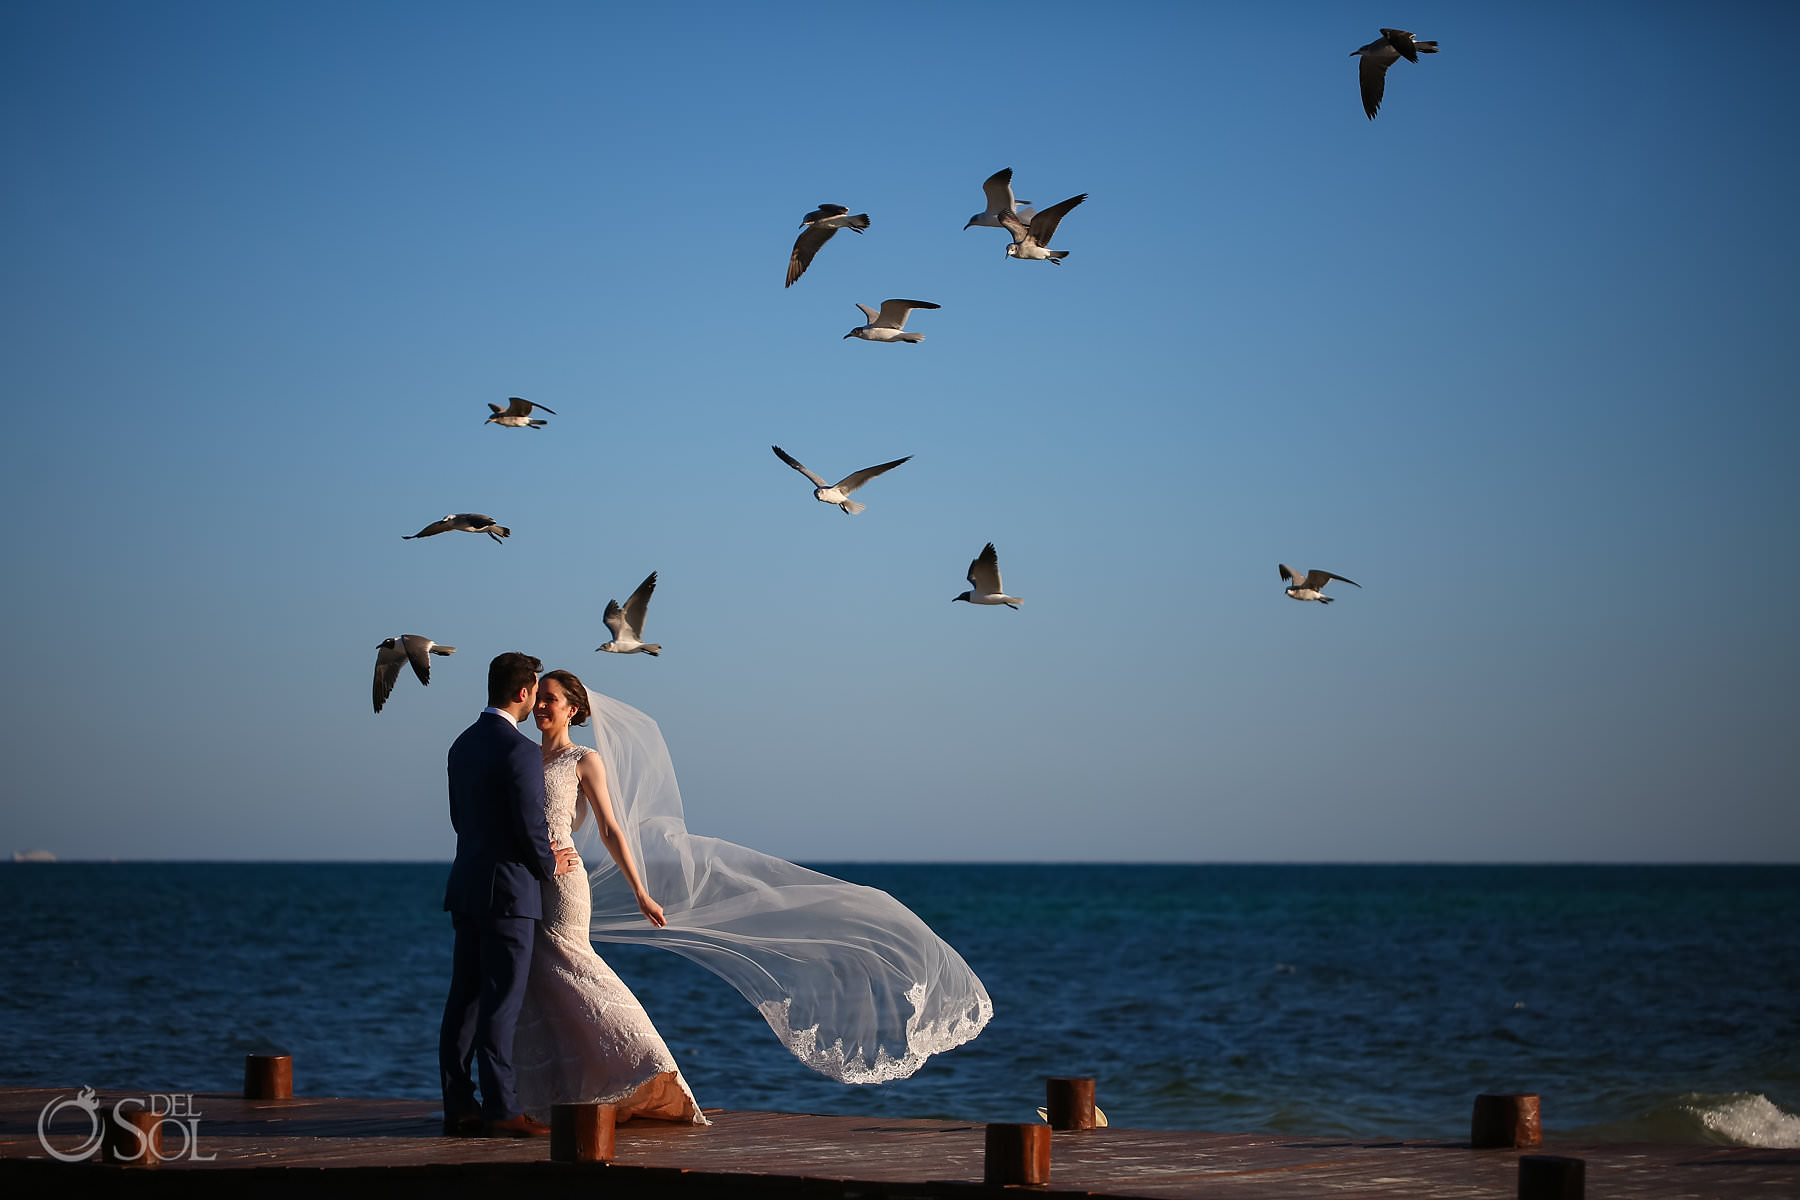 All inclusive resort elopement ideas bride with long veil surrounded by birds